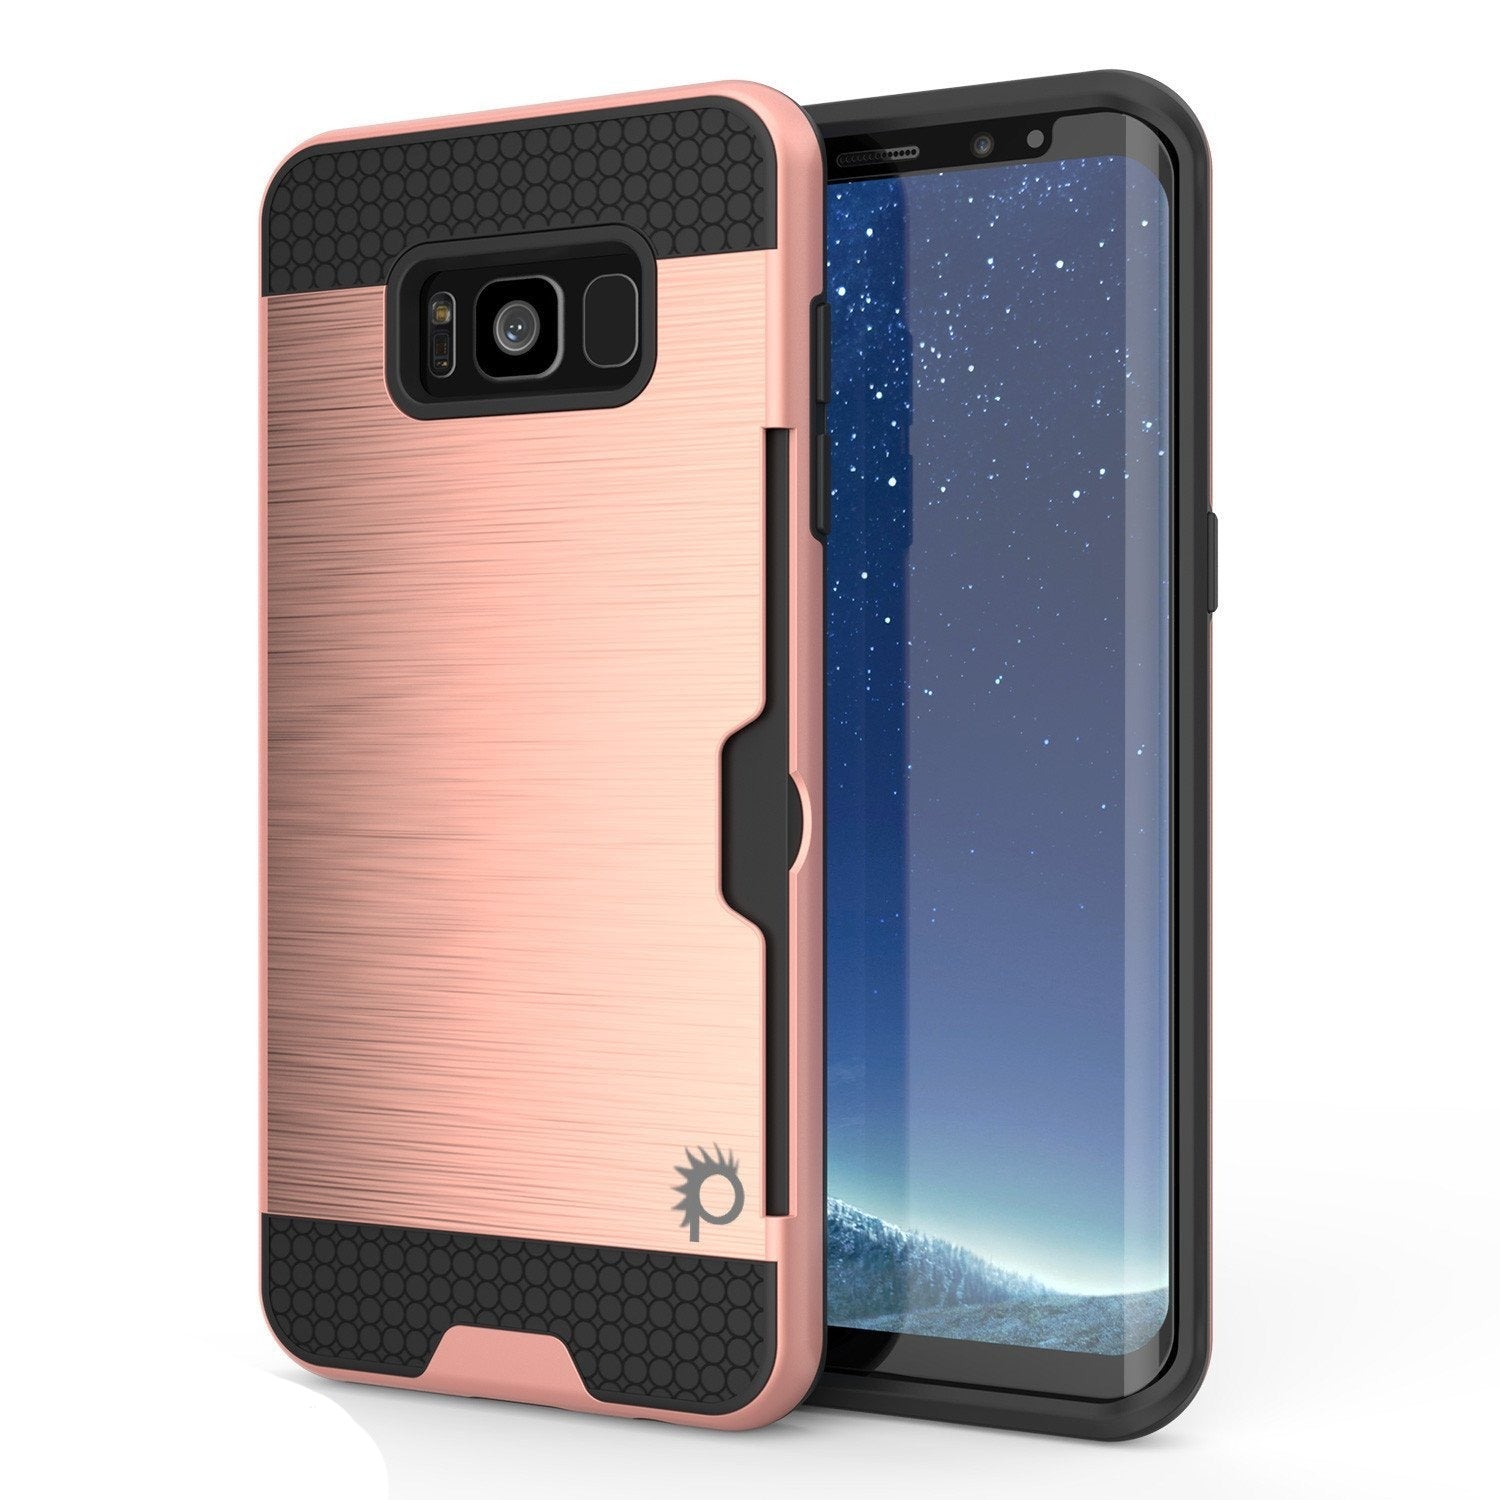 Galaxy S8 Case, PUNKcase [SLOT Series] [Slim Fit] Dual-Layer Armor Cover w/Integrated Anti-Shock System, Credit Card Slot & PUNKSHIELD Screen Protector for Samsung Galaxy S8[Rose Gold]